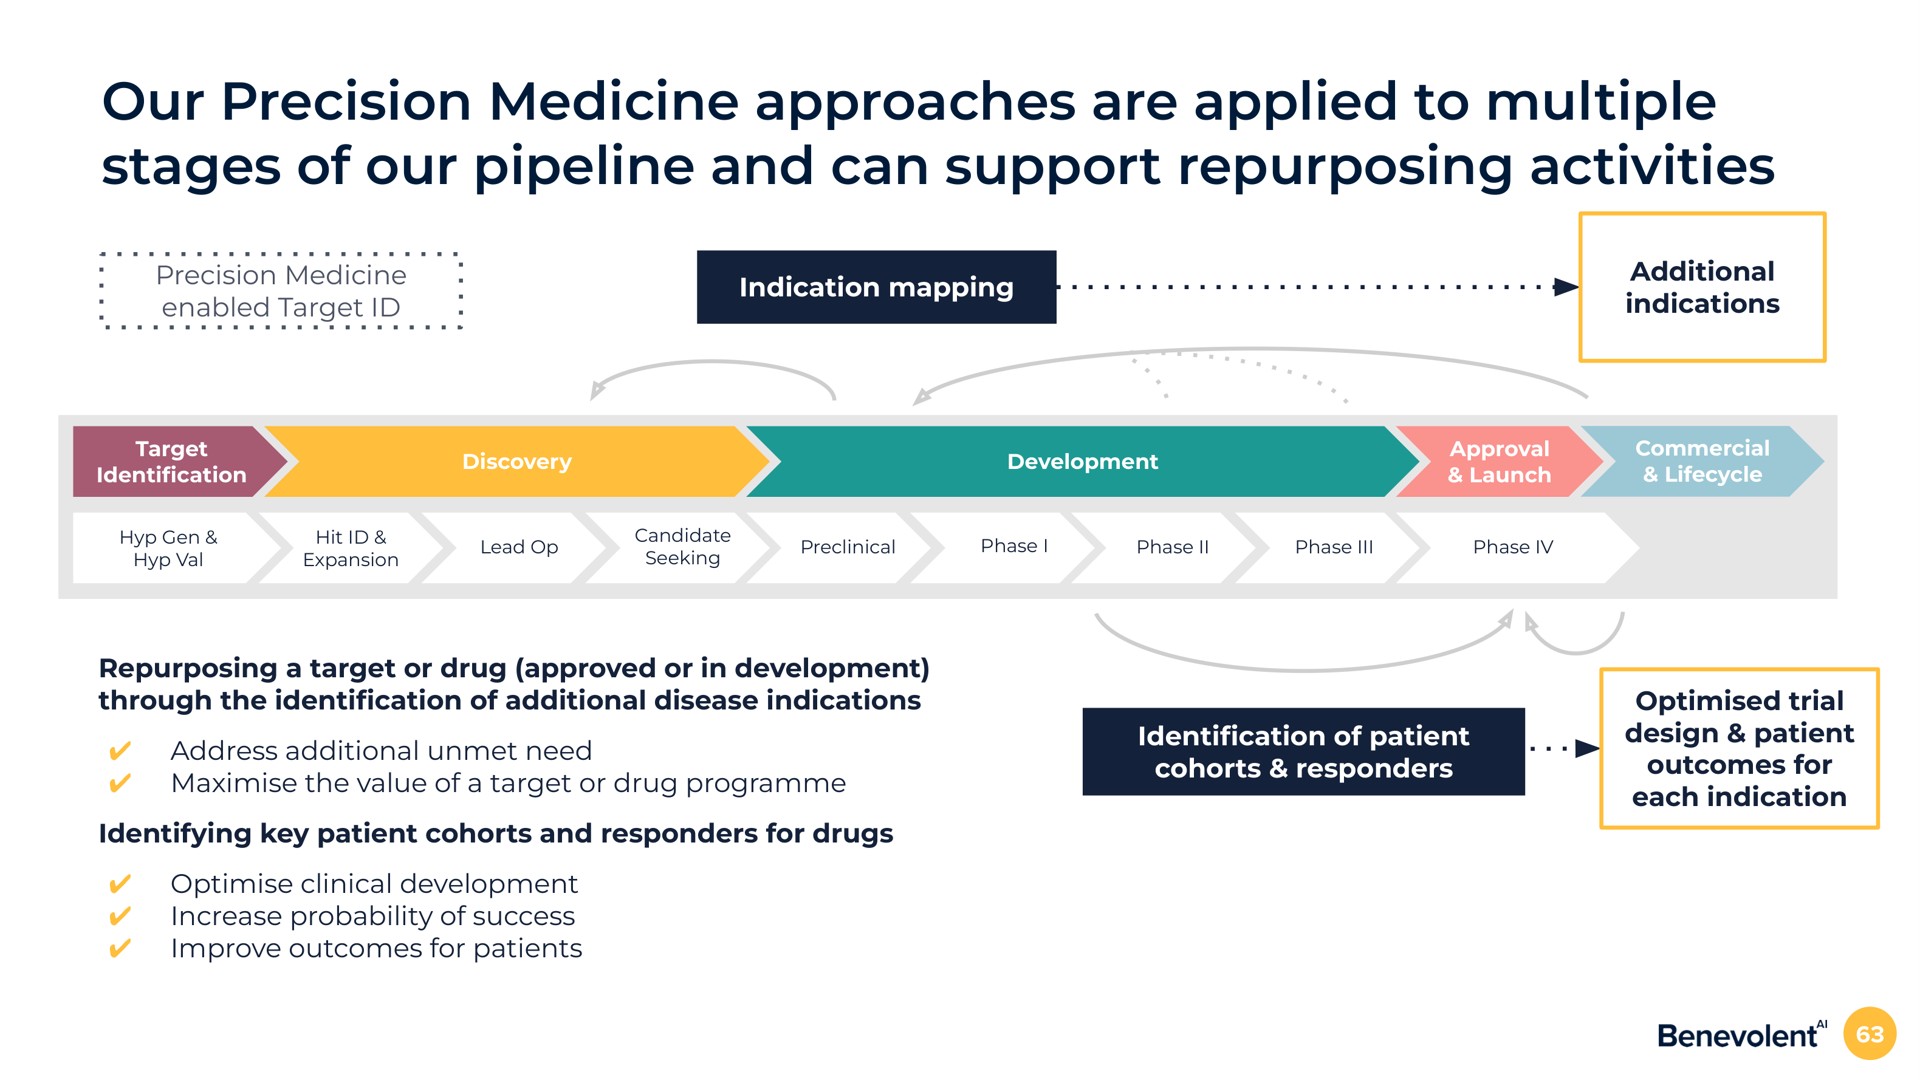 our precision medicine approaches are applied to multiple stages of our pipeline and can support activities precision medicine enabled target indication mapping additional indications a target or drug approved or in development through the cation of additional disease indications address additional unmet need the value of a target or drug identifying key patient cohorts and responders for drugs clinical development increase probability of success improve outcomes for patients cation of patient cohorts responders trial design patient outcomes for each indication | BenevolentAI